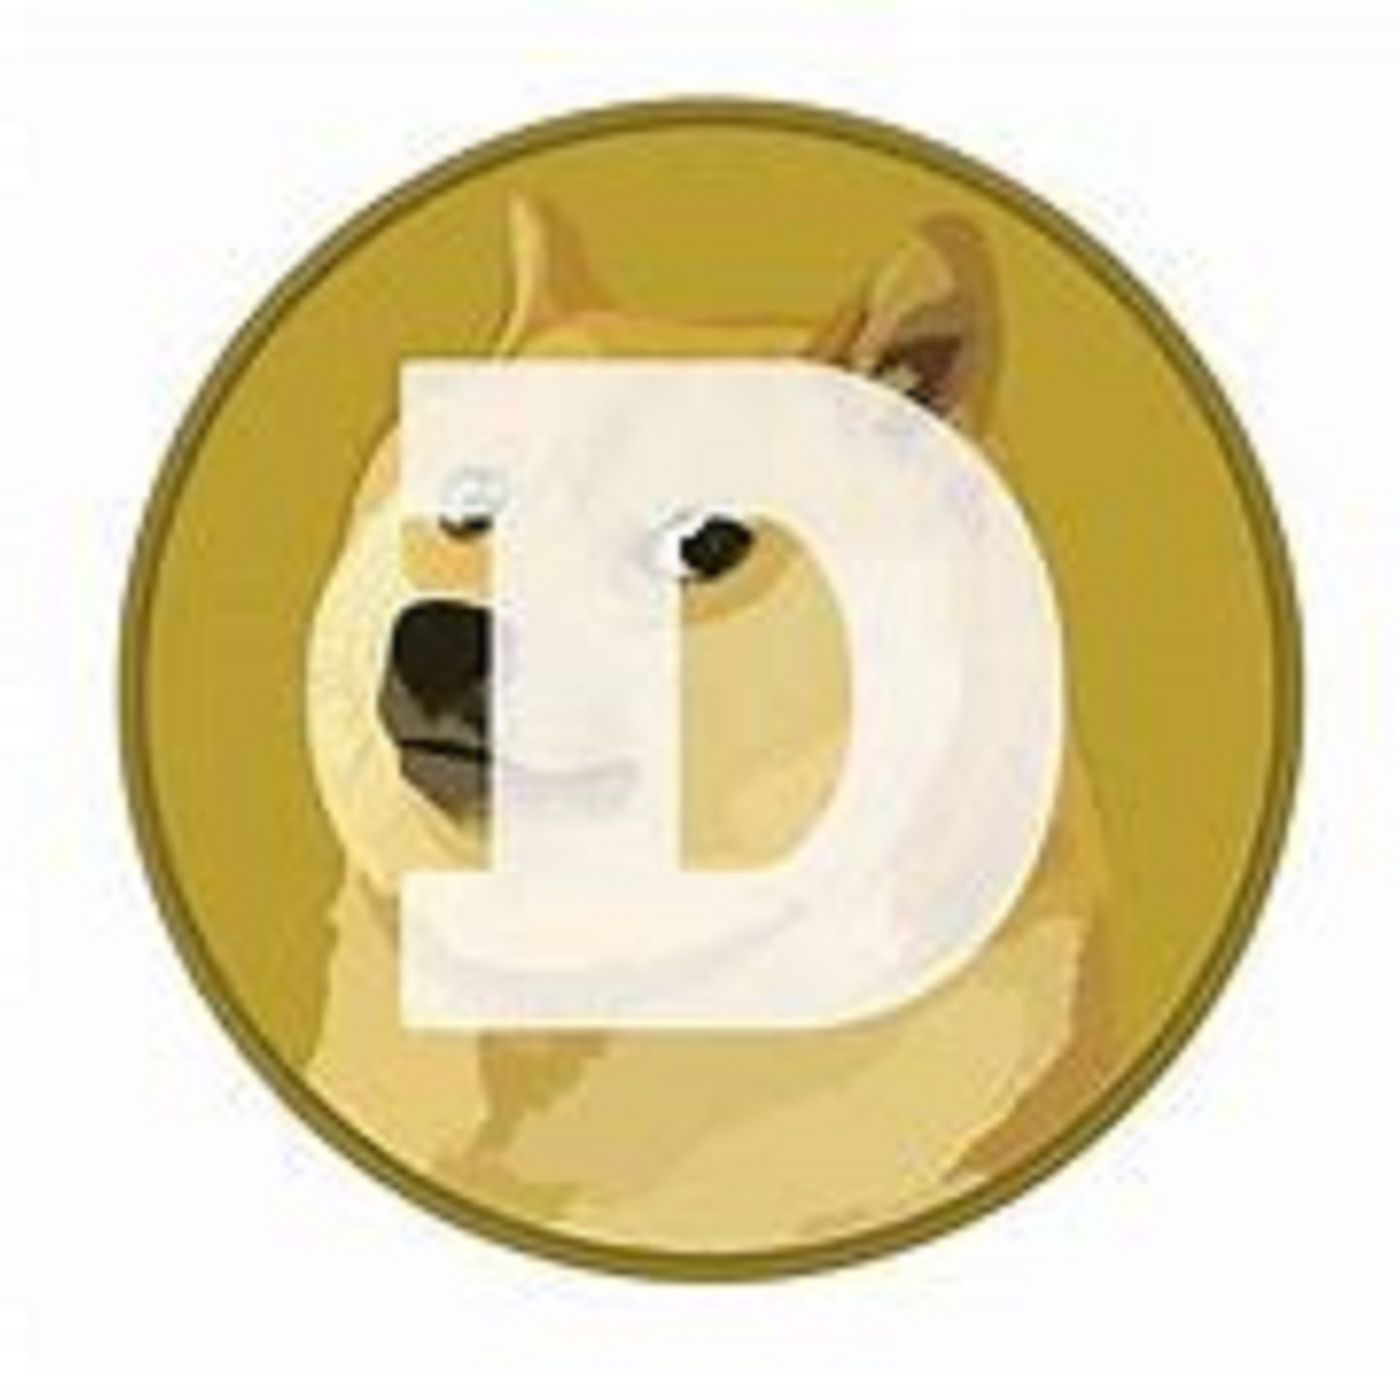 Dogecoin Price Prediction – DOGE Pump To $0.12 Seems Imminent